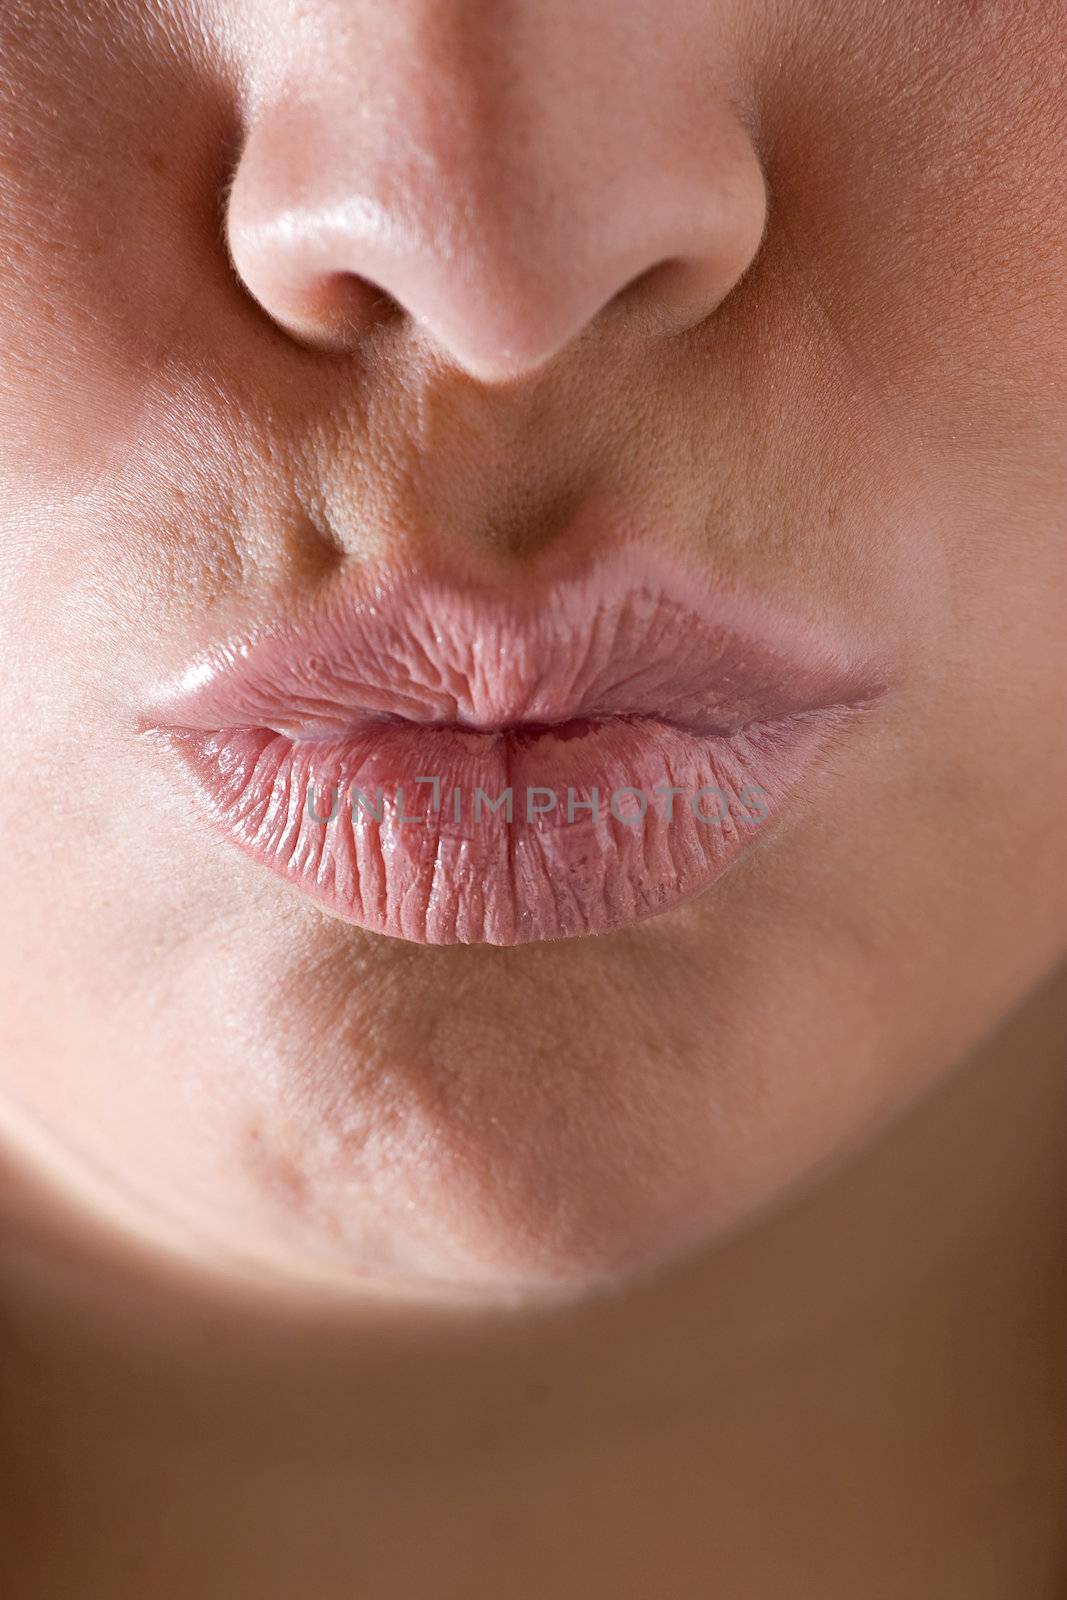 Puckered Up Lips by graficallyminded